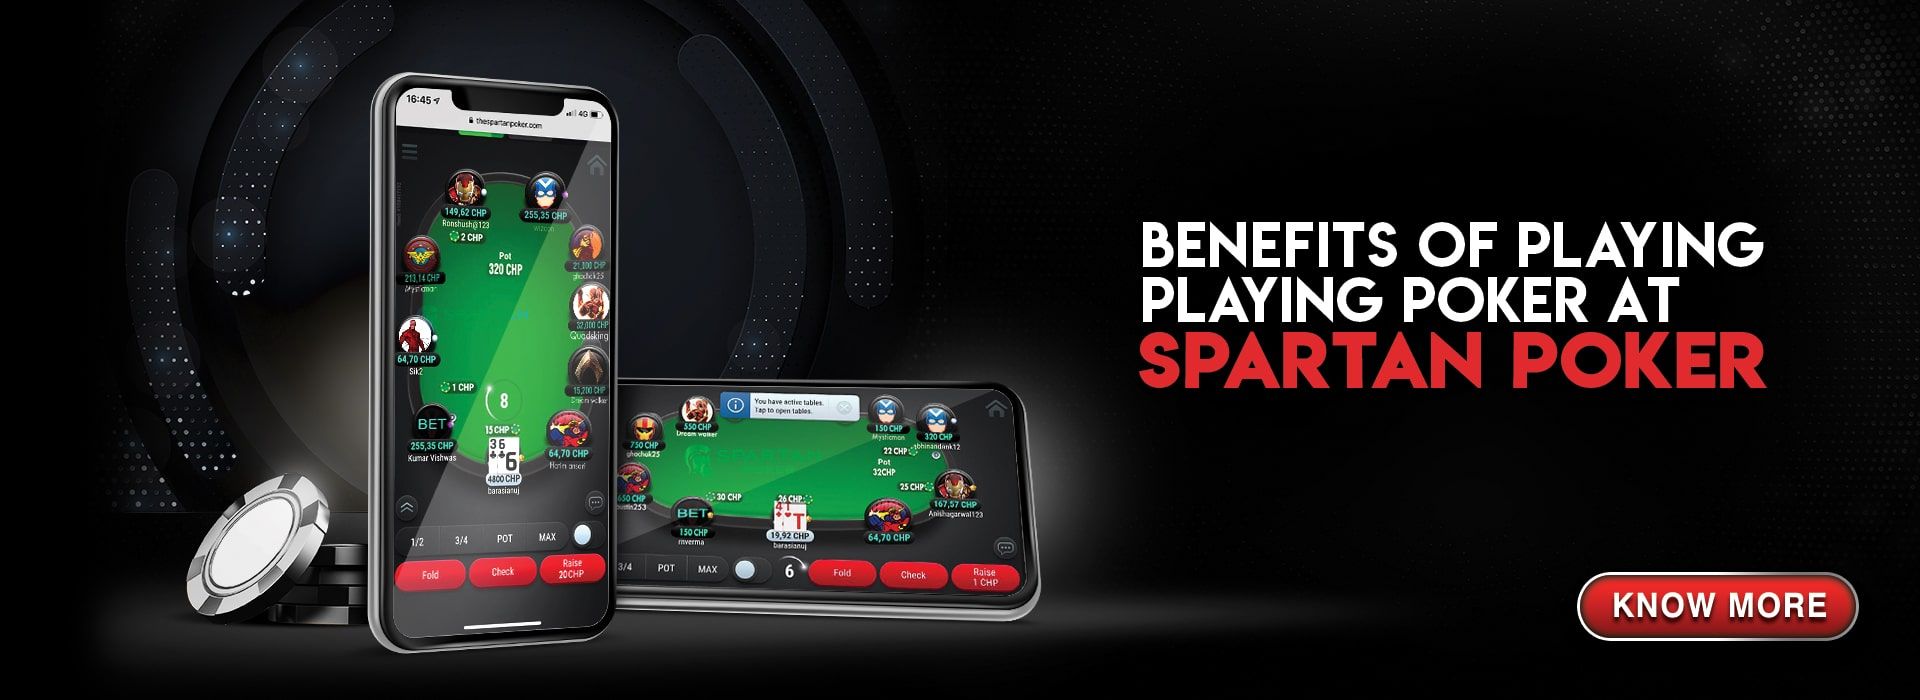 Infographic on Benefits of playing poker online